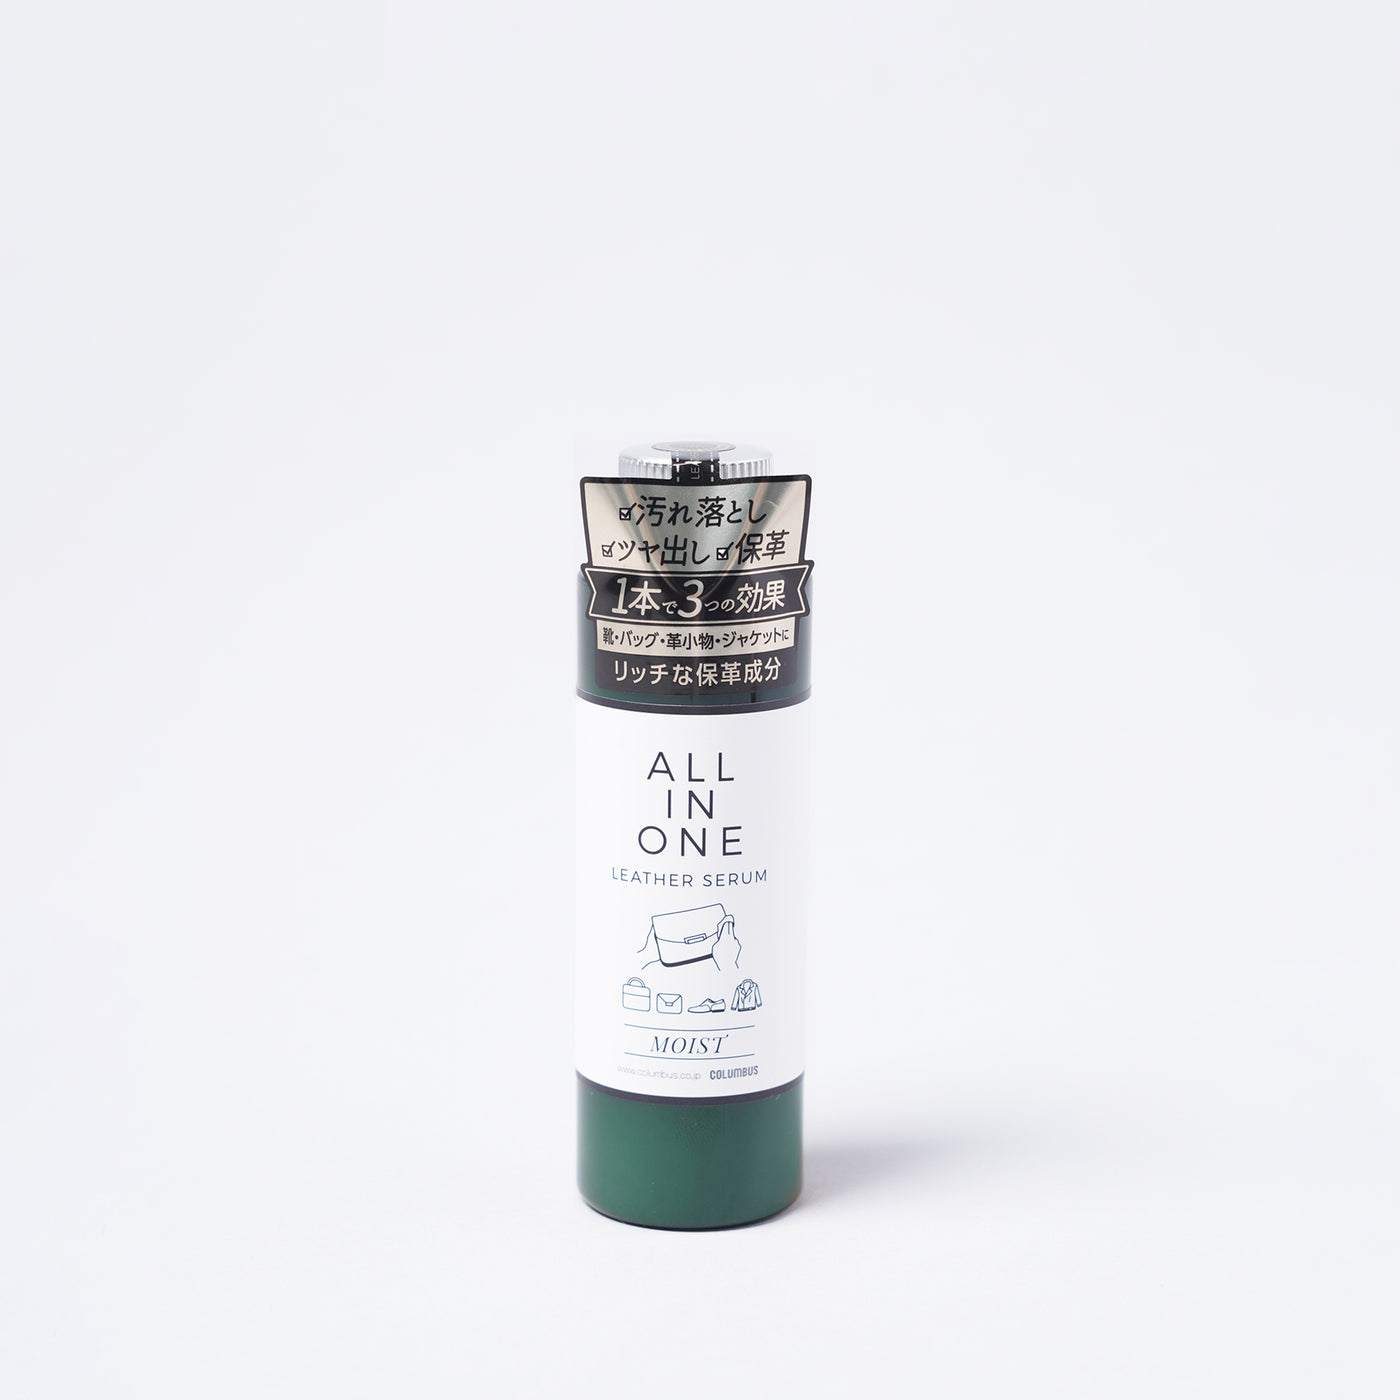 ＜COLUMBUS＞ ALL IN ONE LEATHER SERUM 保濕款/無色